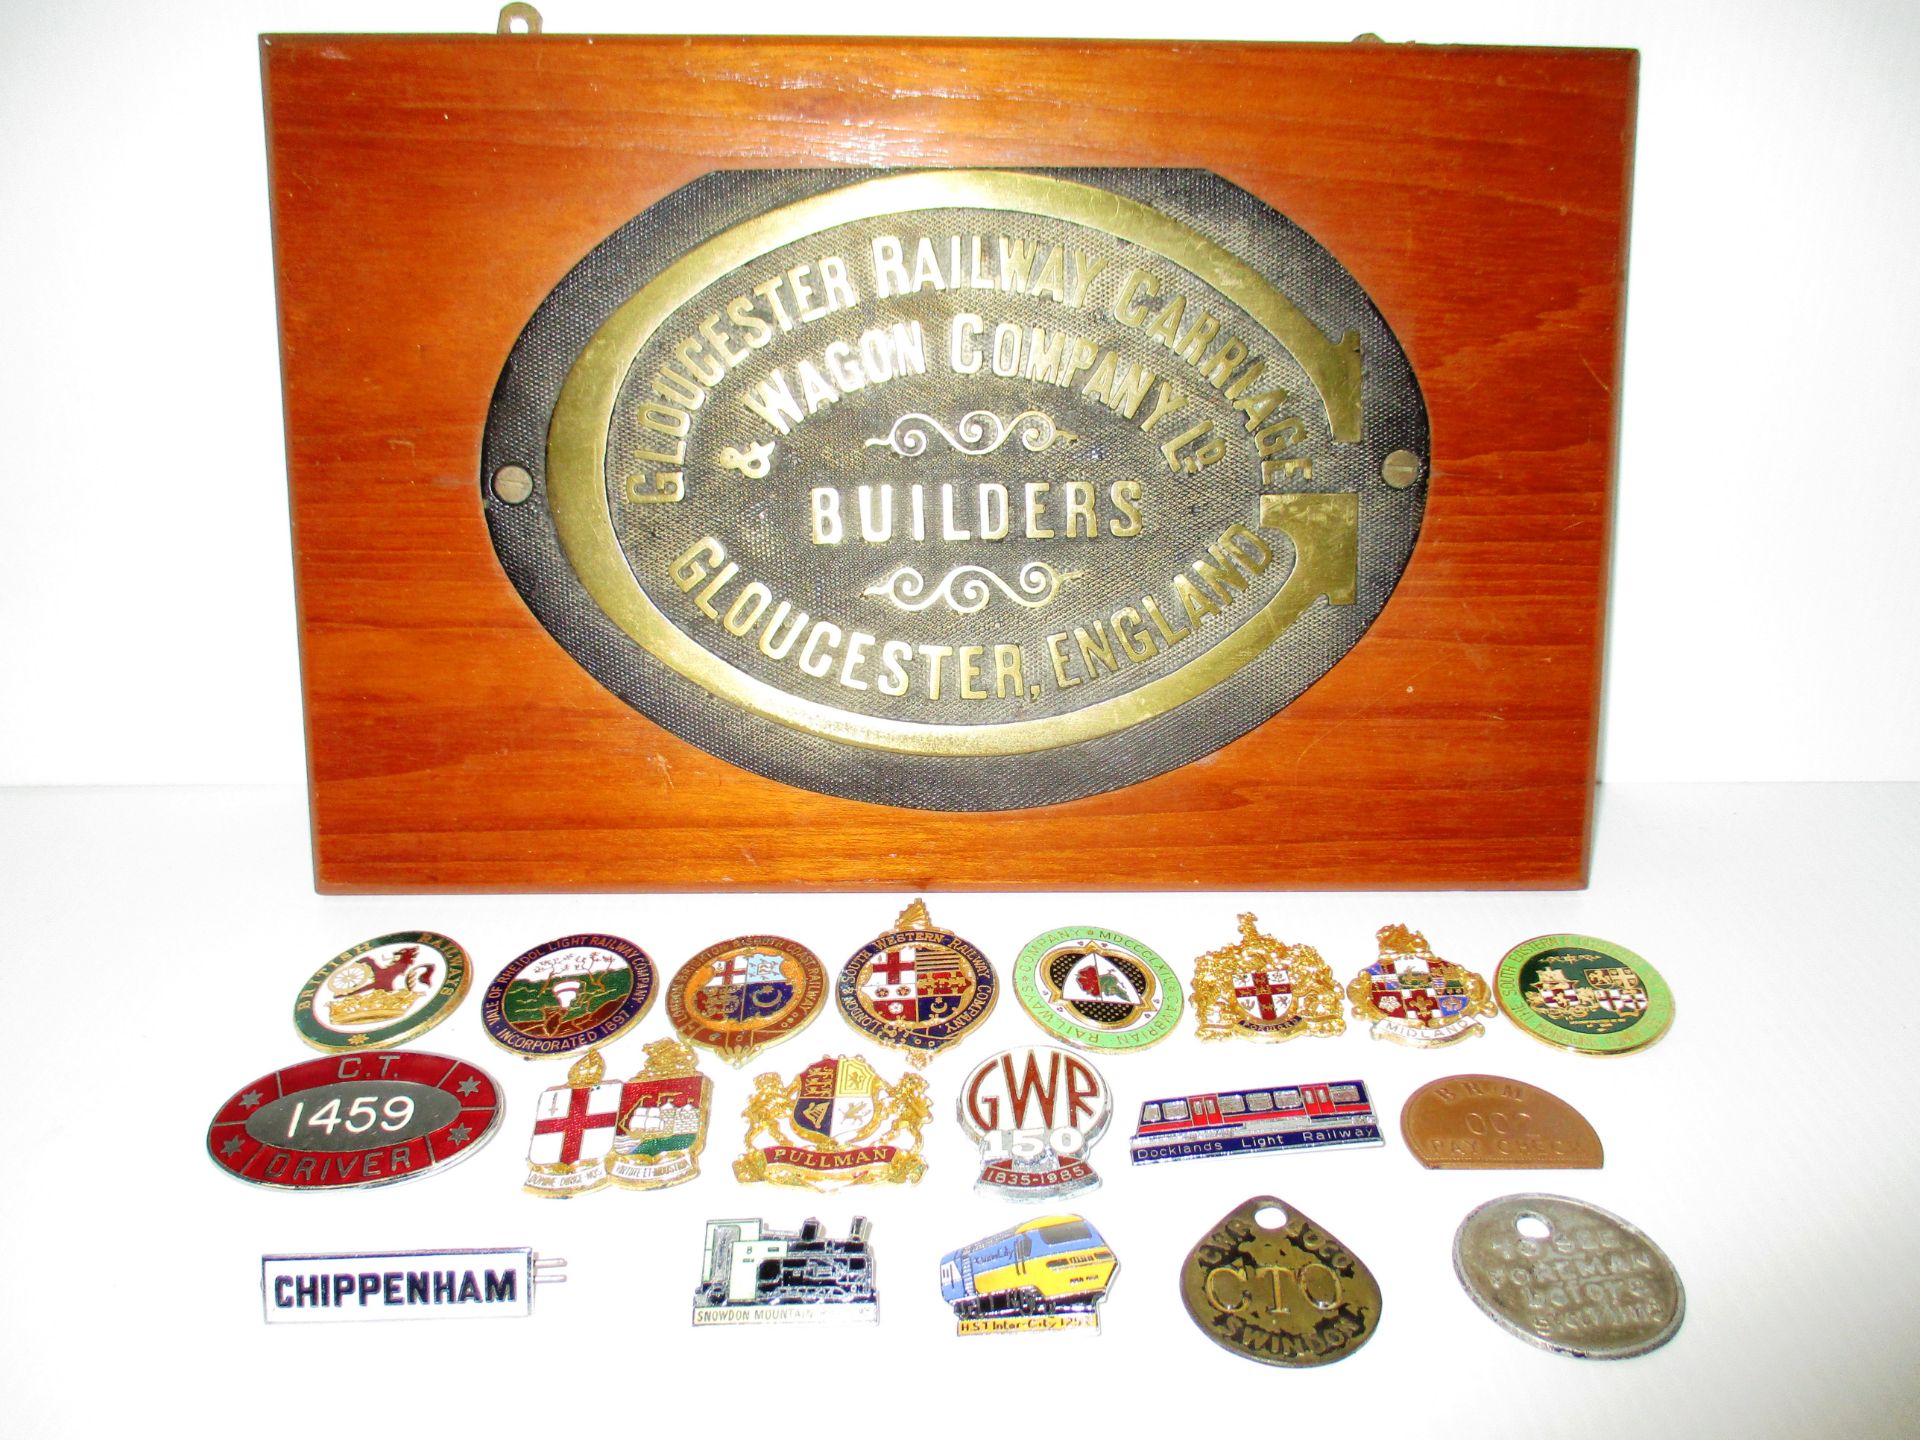 A Gloucester Railway Carriage and Wagon Company plaque mounted on wooden plinth and a quantity of